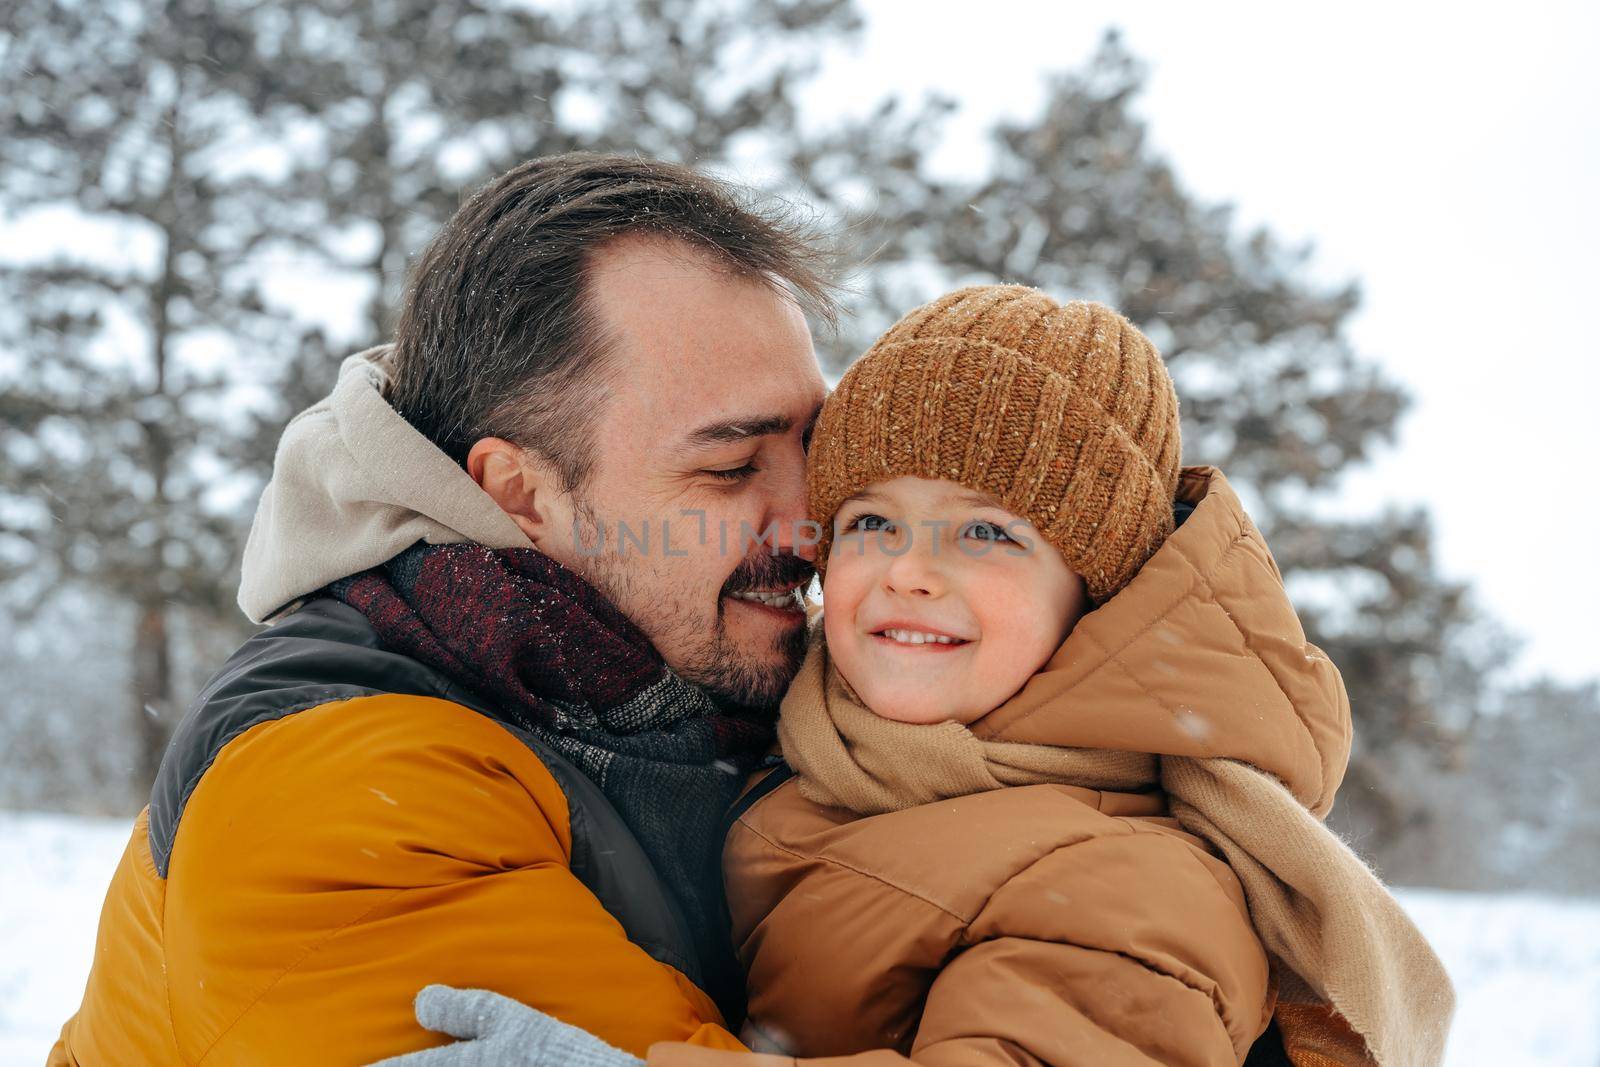 Father and son playing in the park on winter day by Fabrikasimf